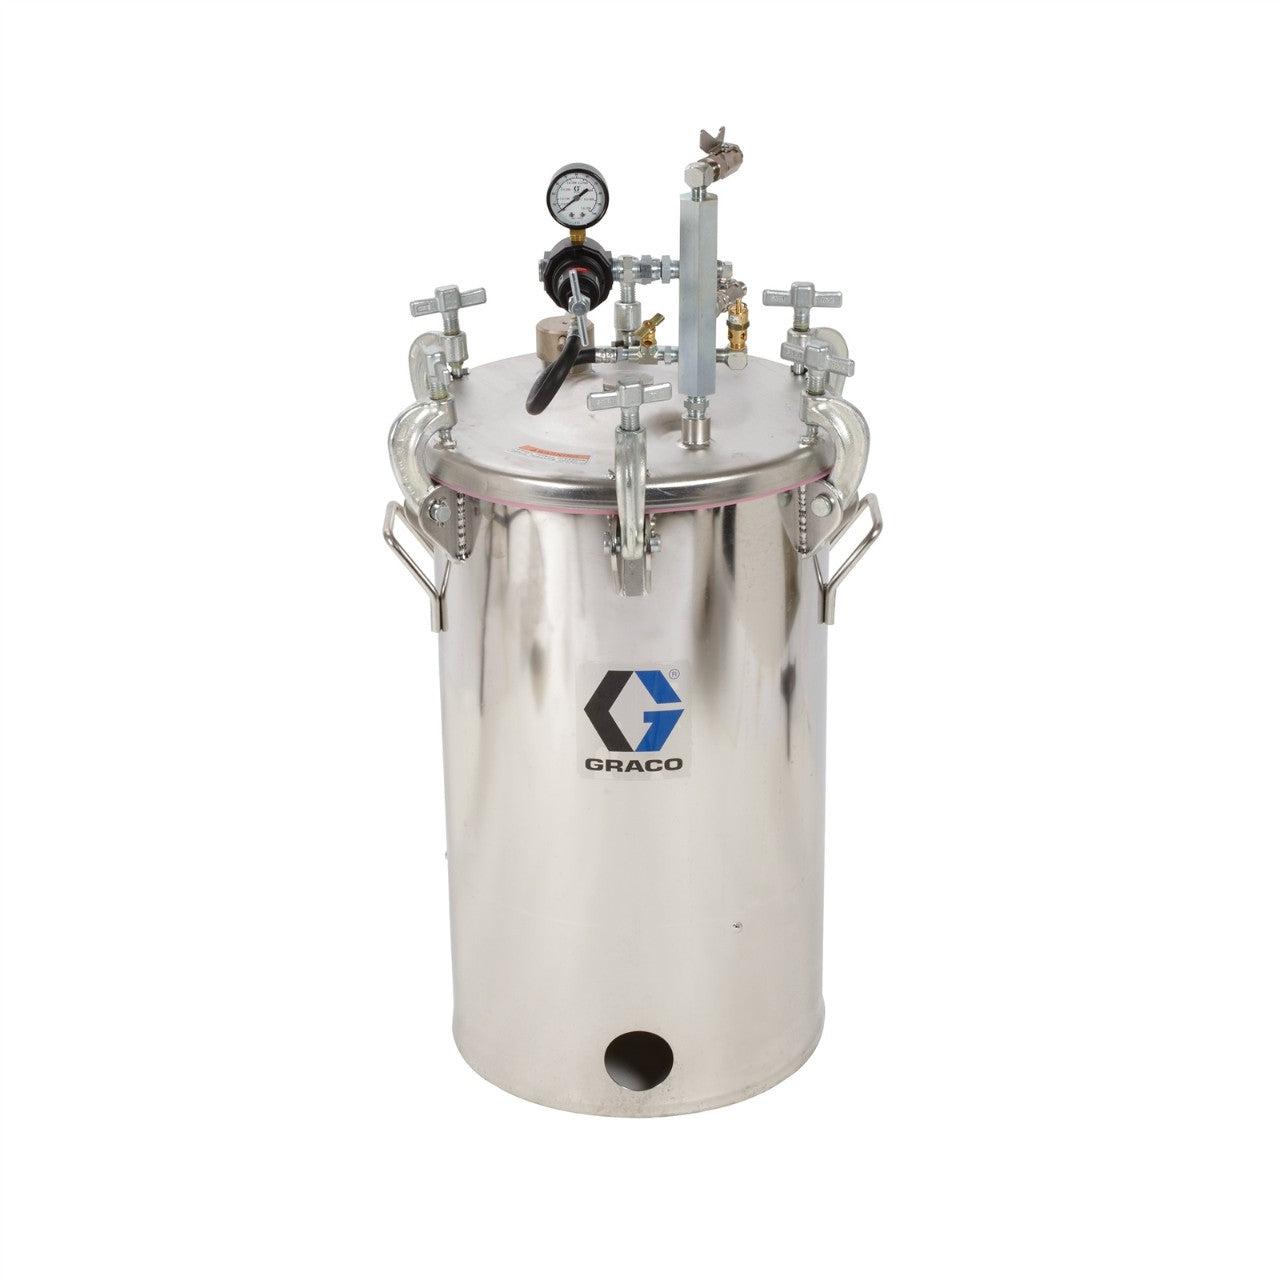 10 Gallon High Pressure Stainless Steel Tank, without agitator